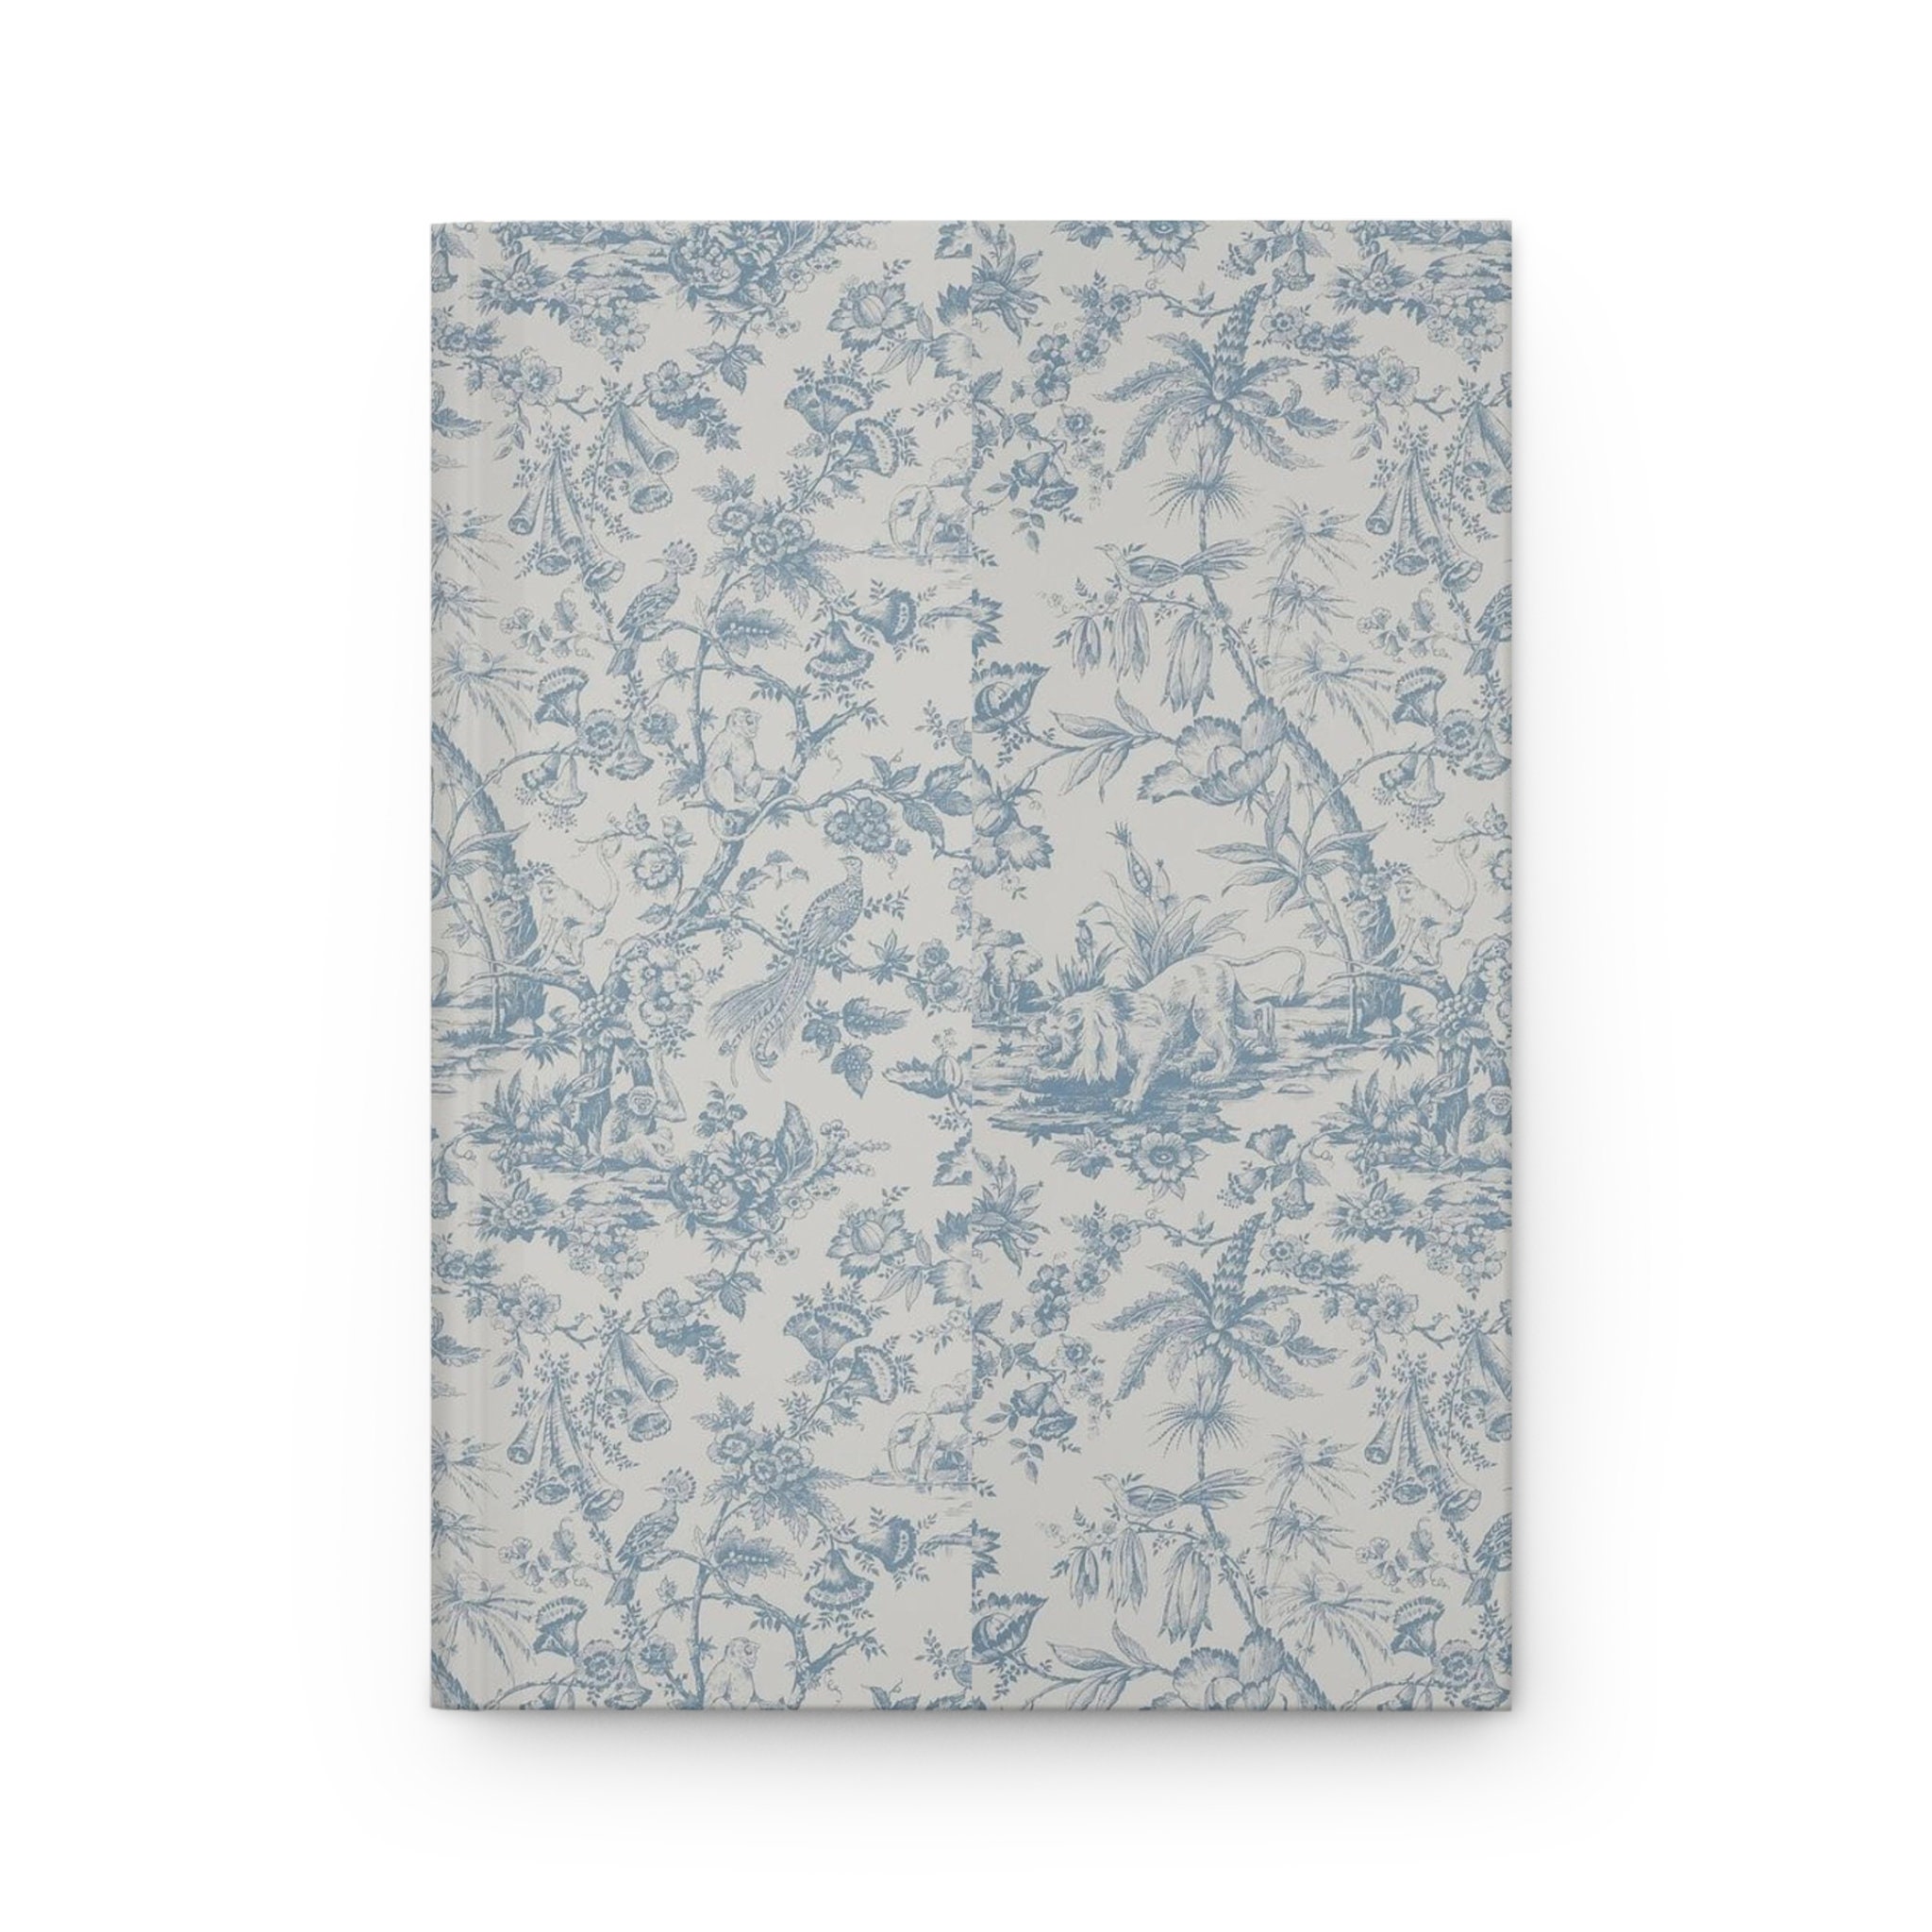 Aesthetic Floral Lined Notebook Journal: Aesthetic, Coquette, Vintage Lined  Journal/Notebook For Women, 6x9, Lined/Ruled Cream Pages